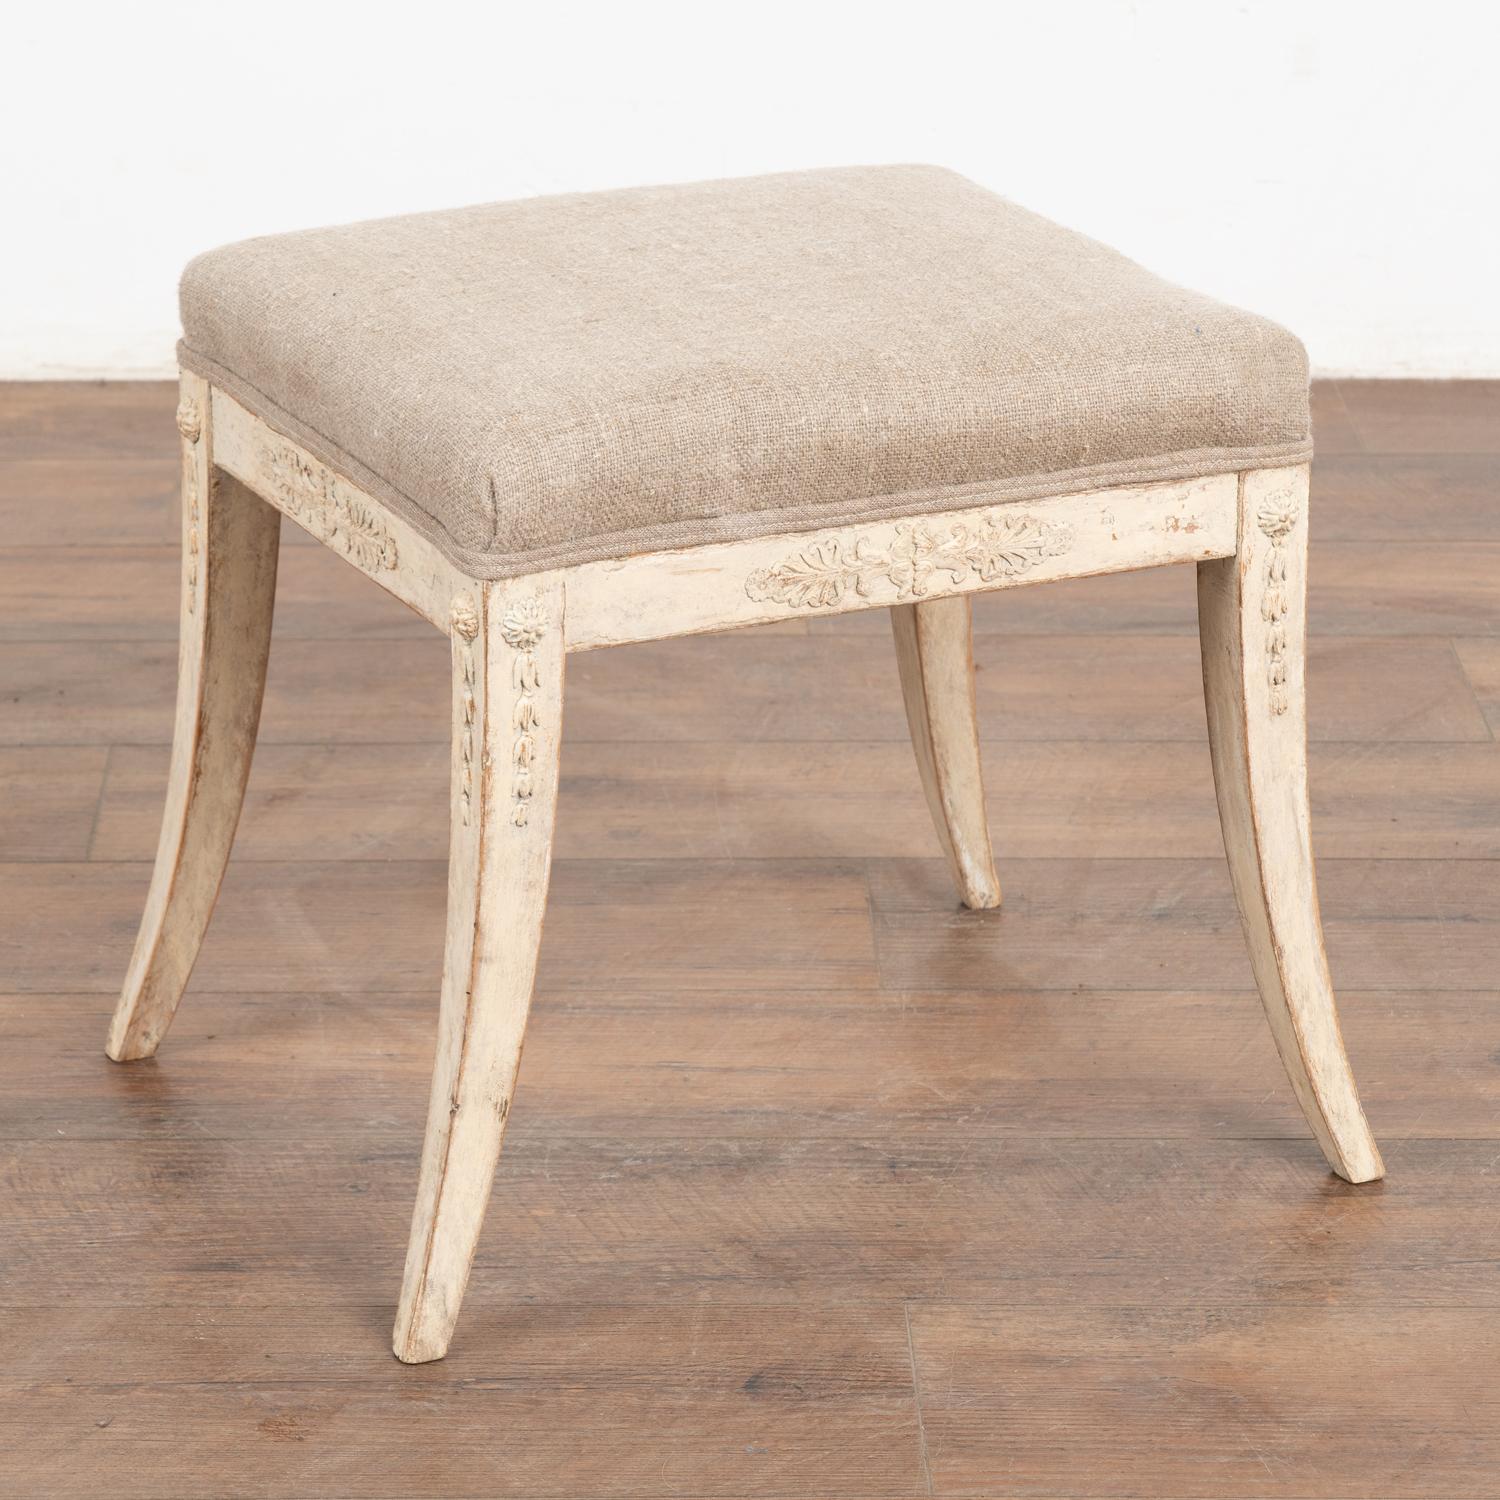 This Swedish stool or tabouret has graceful saber legs and applied carving along the skirt and legs which adds an elegant touch.
Restored, solid/stable and ready to be enjoyed. Later professionally painted in layered shades of antique white, all